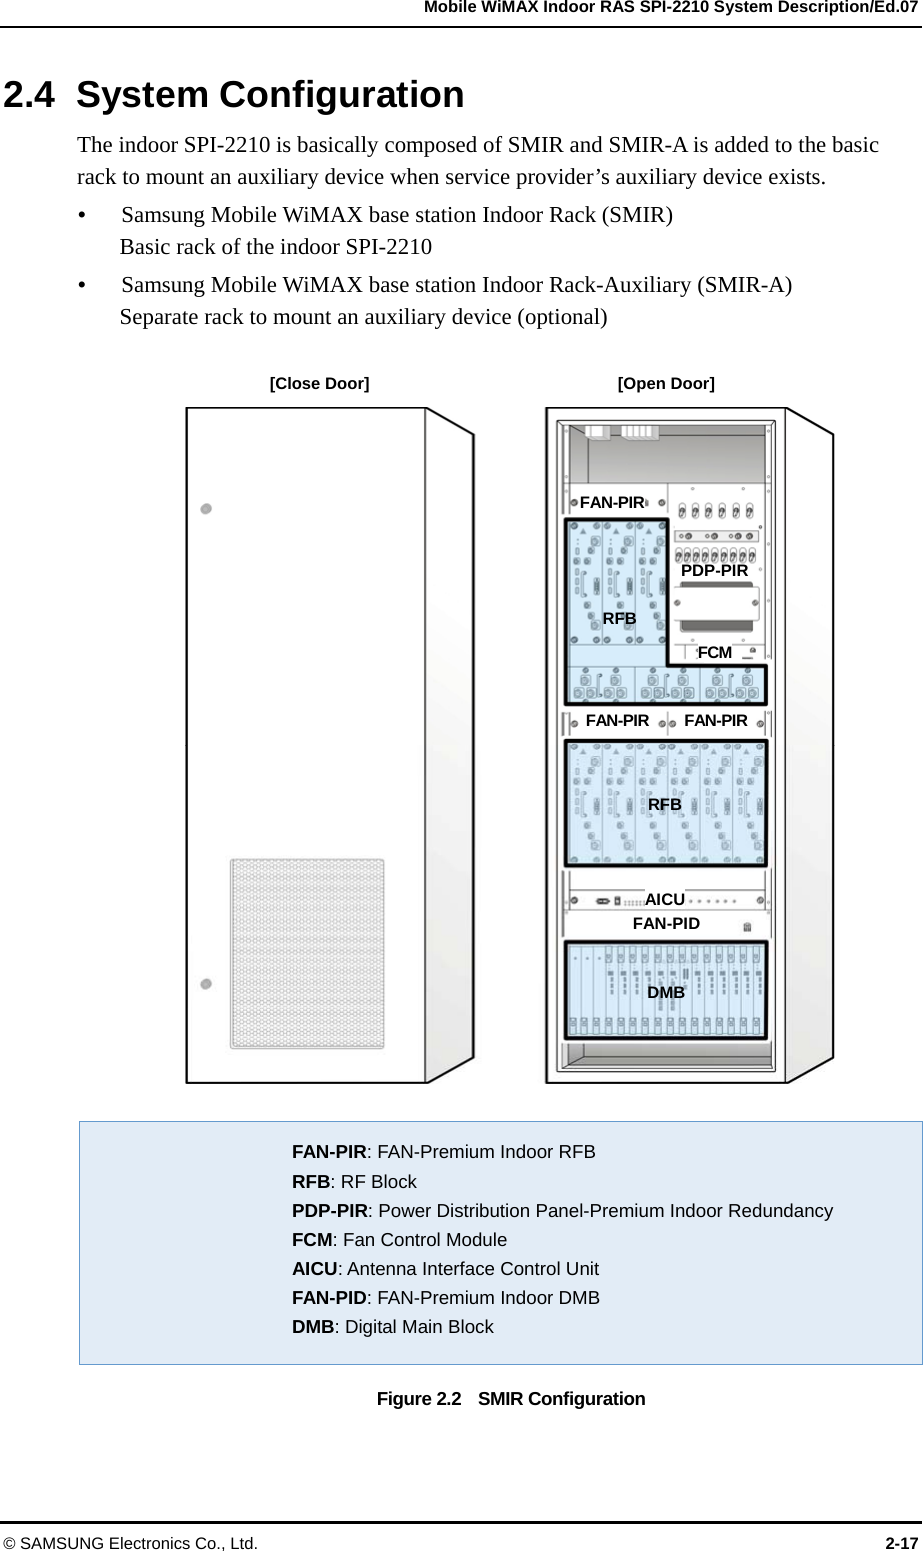   Mobile WiMAX Indoor RAS SPI-2210 System Description/Ed.07 © SAMSUNG Electronics Co., Ltd.  2-17 2.4 System Configuration The indoor SPI-2210 is basically composed of SMIR and SMIR-A is added to the basic rack to mount an auxiliary device when service provider’s auxiliary device exists. y Samsung Mobile WiMAX base station Indoor Rack (SMIR) Basic rack of the indoor SPI-2210 y Samsung Mobile WiMAX base station Indoor Rack-Auxiliary (SMIR-A) Separate rack to mount an auxiliary device (optional)   FAN-PIR: FAN-Premium Indoor RFB RFB: RF Block PDP-PIR: Power Distribution Panel-Premium Indoor Redundancy FCM: Fan Control Module AICU: Antenna Interface Control Unit FAN-PID: FAN-Premium Indoor DMB DMB: Digital Main Block Figure 2.2    SMIR Configuration  [Close Door]  [Open Door] RFB RFB FAN-PIR FAN-PIR PDP-PIR AICU FAN-PID DMB FCM FAN-PIR 